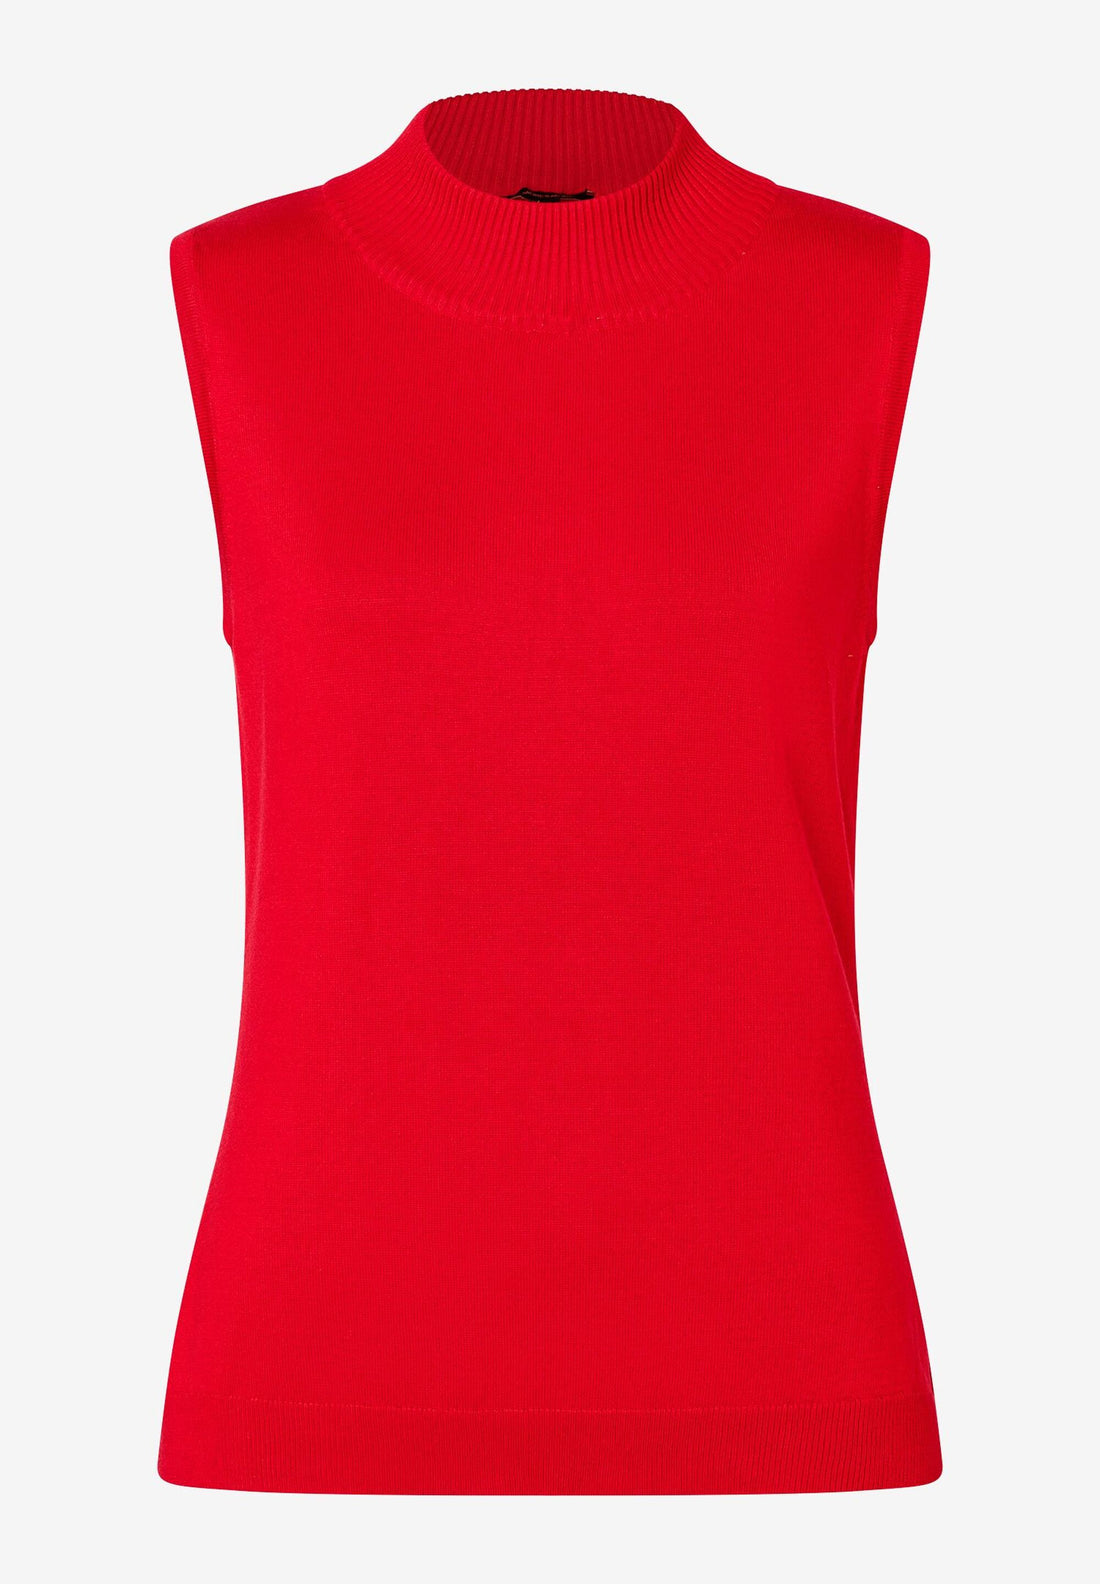 Power Red Sleeveless Top With High Neck_31081053_0523_02